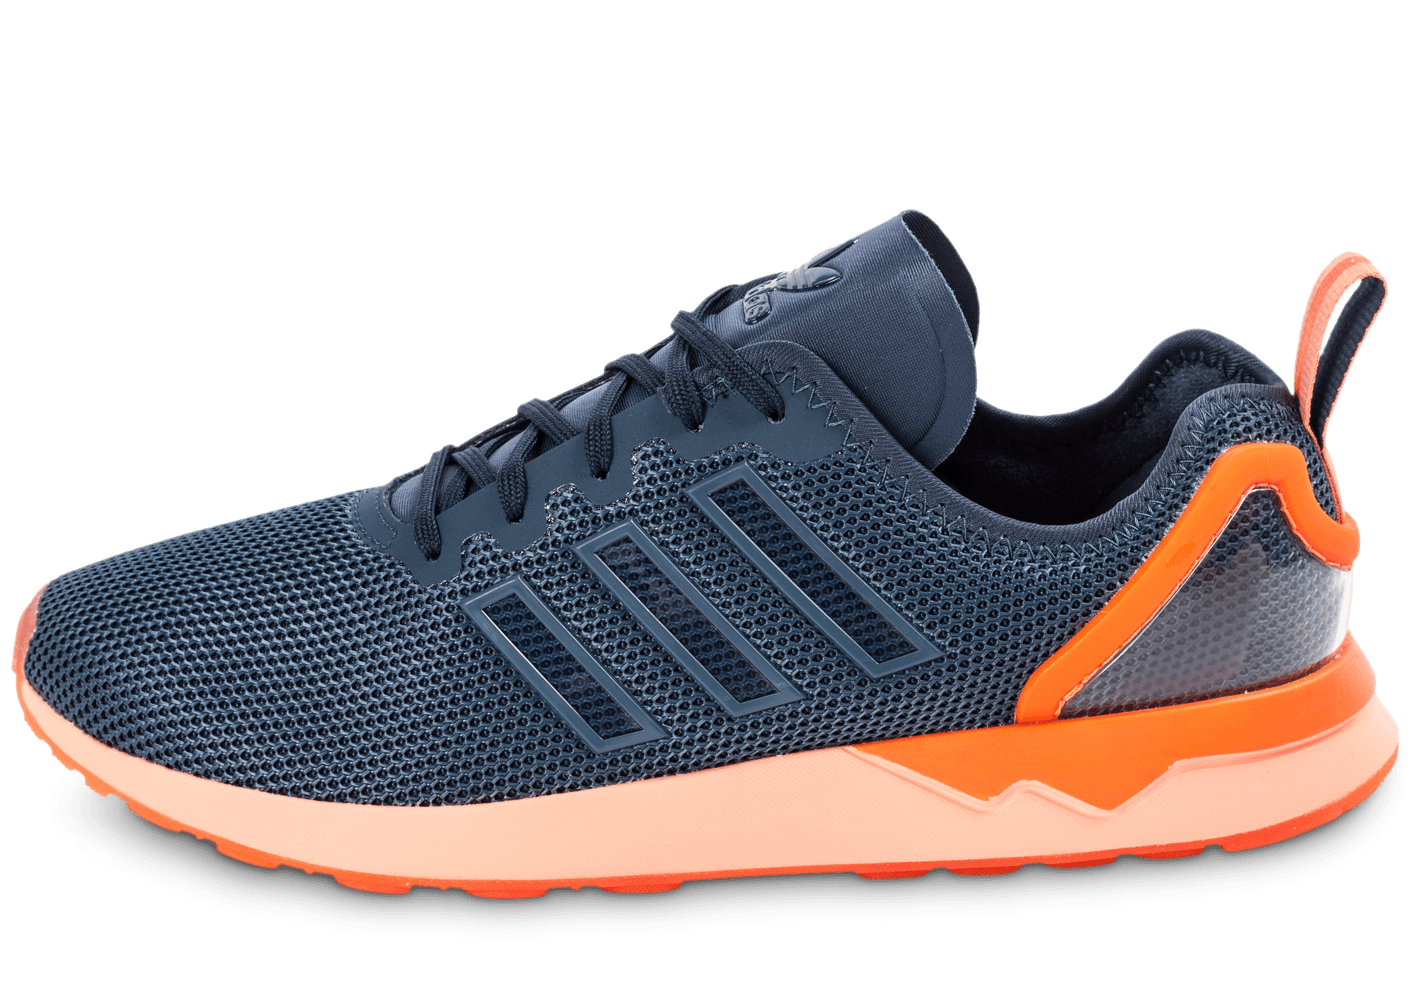 adidas zx flux 2.0 homme 2017